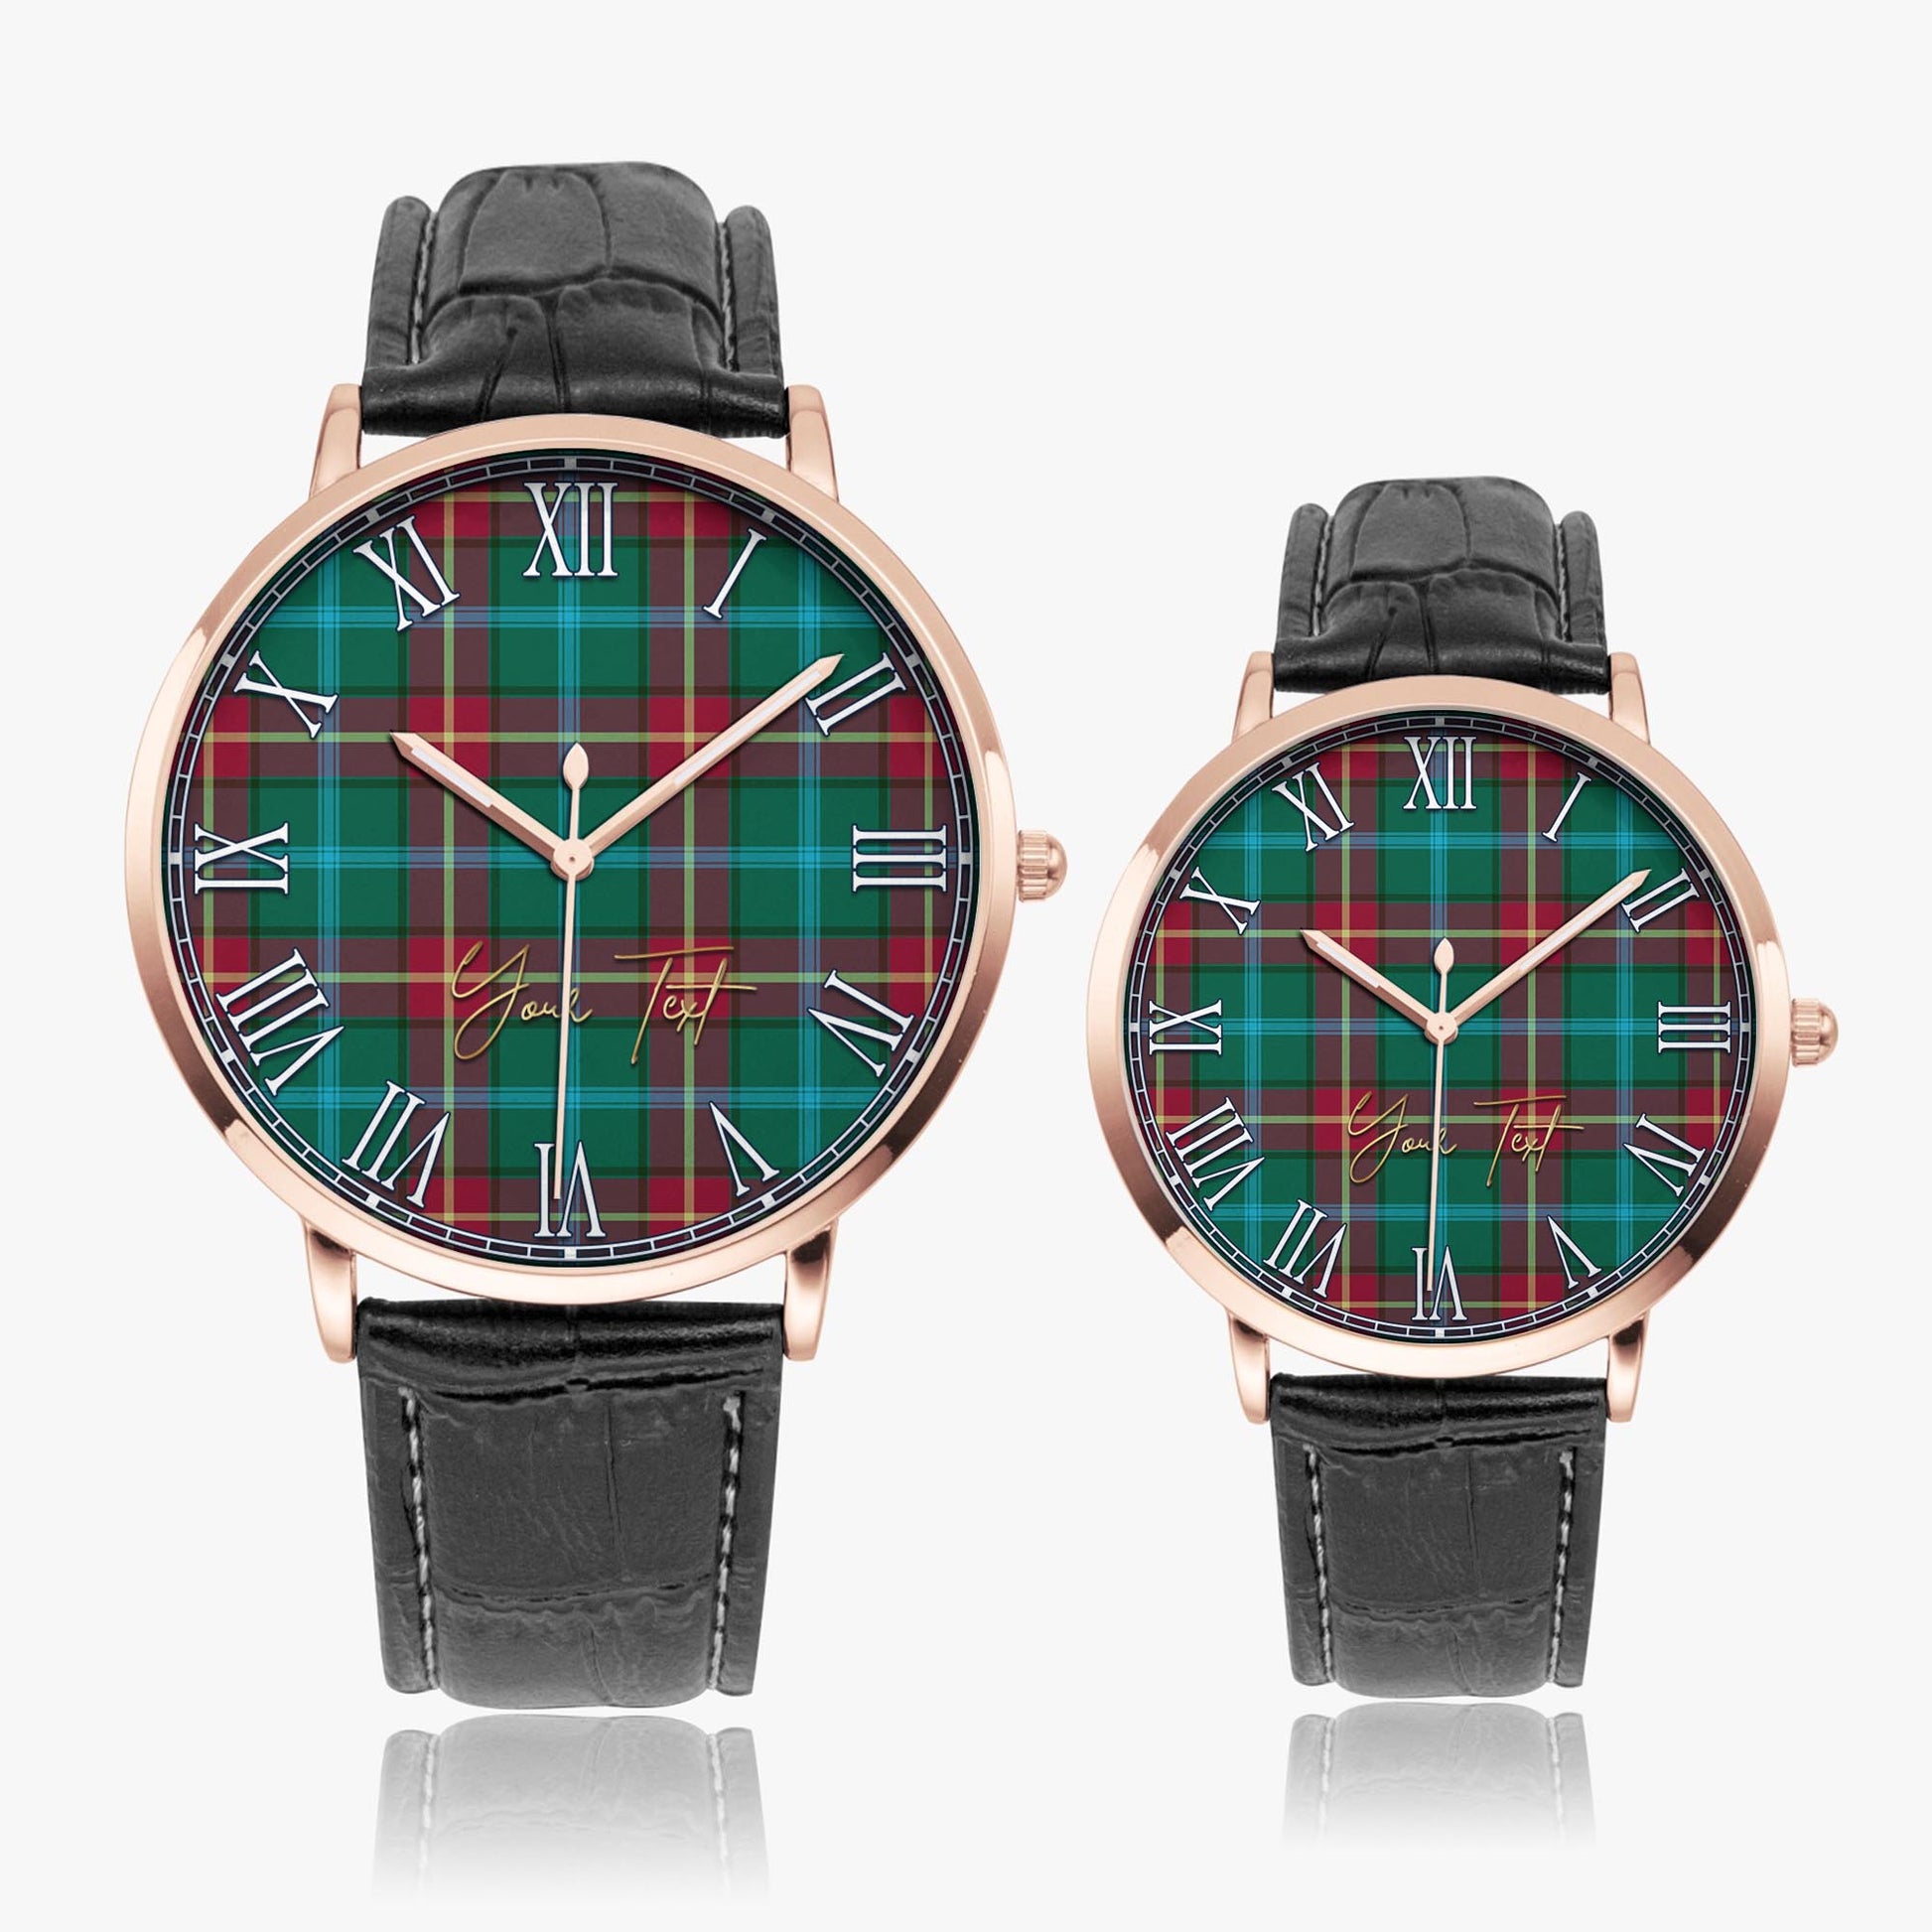 Manitoba Province Canada Tartan Personalized Your Text Leather Trap Quartz Watch Ultra Thin Rose Gold Case With Black Leather Strap - Tartanvibesclothing